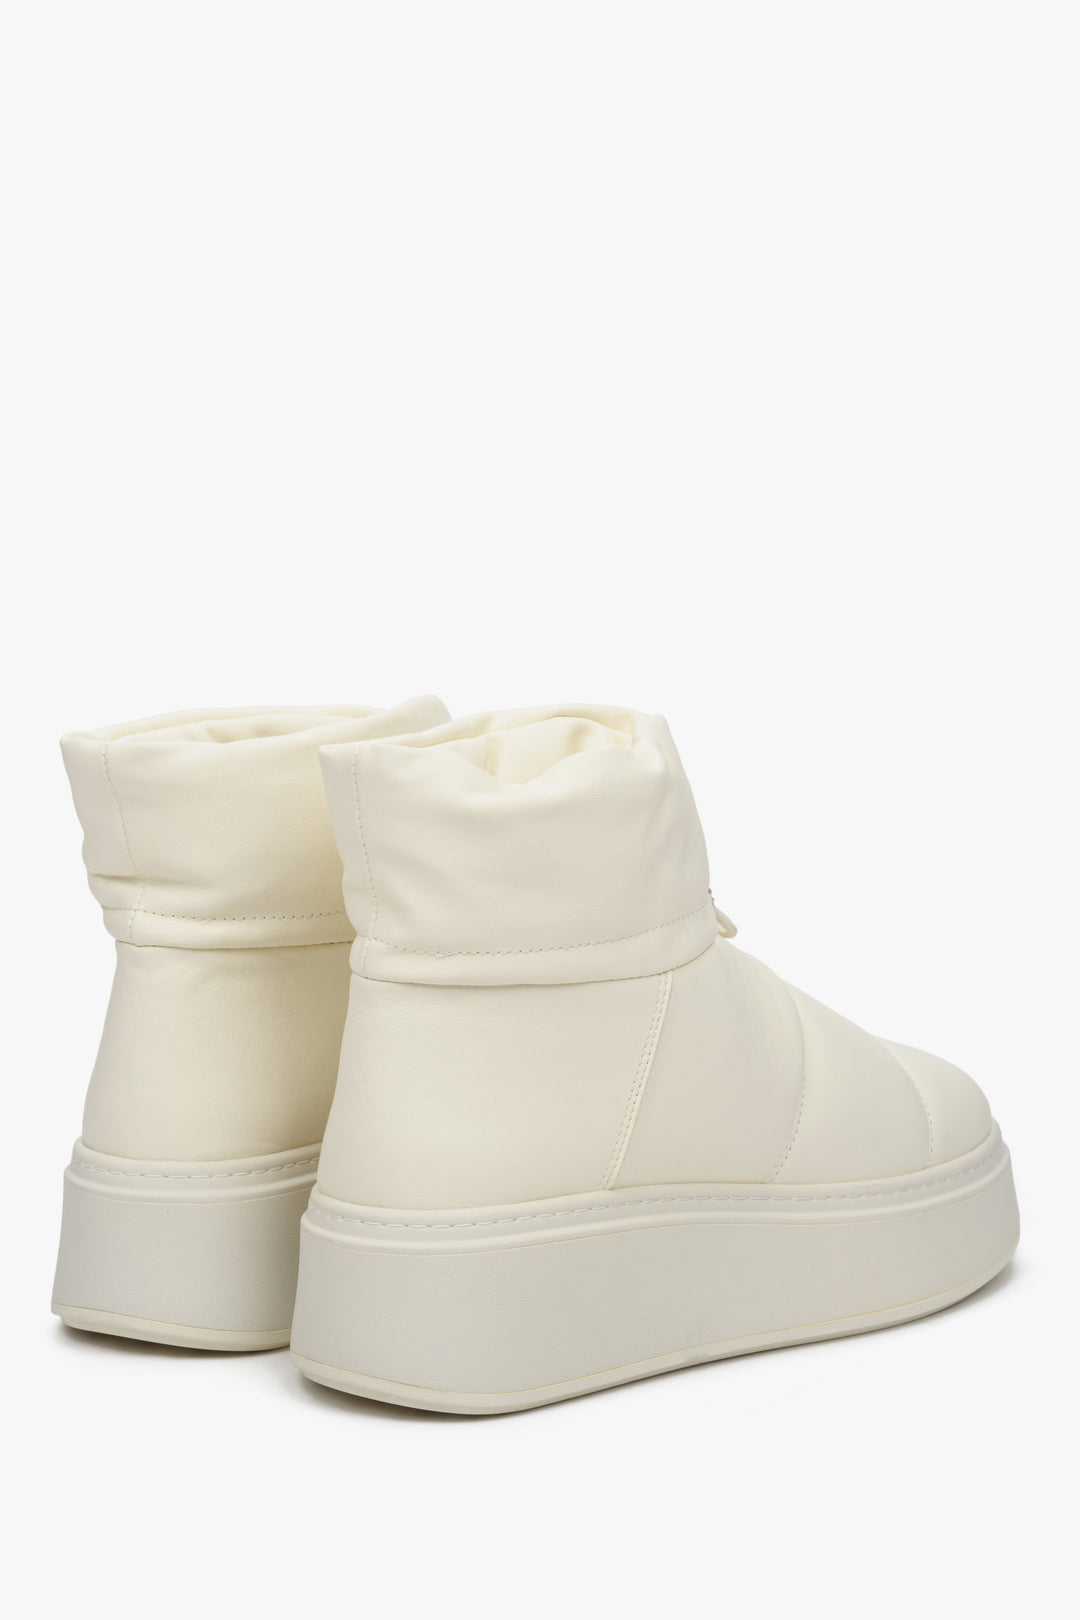 Estro women's white leather snow boots - presentation of the heel and side seam.